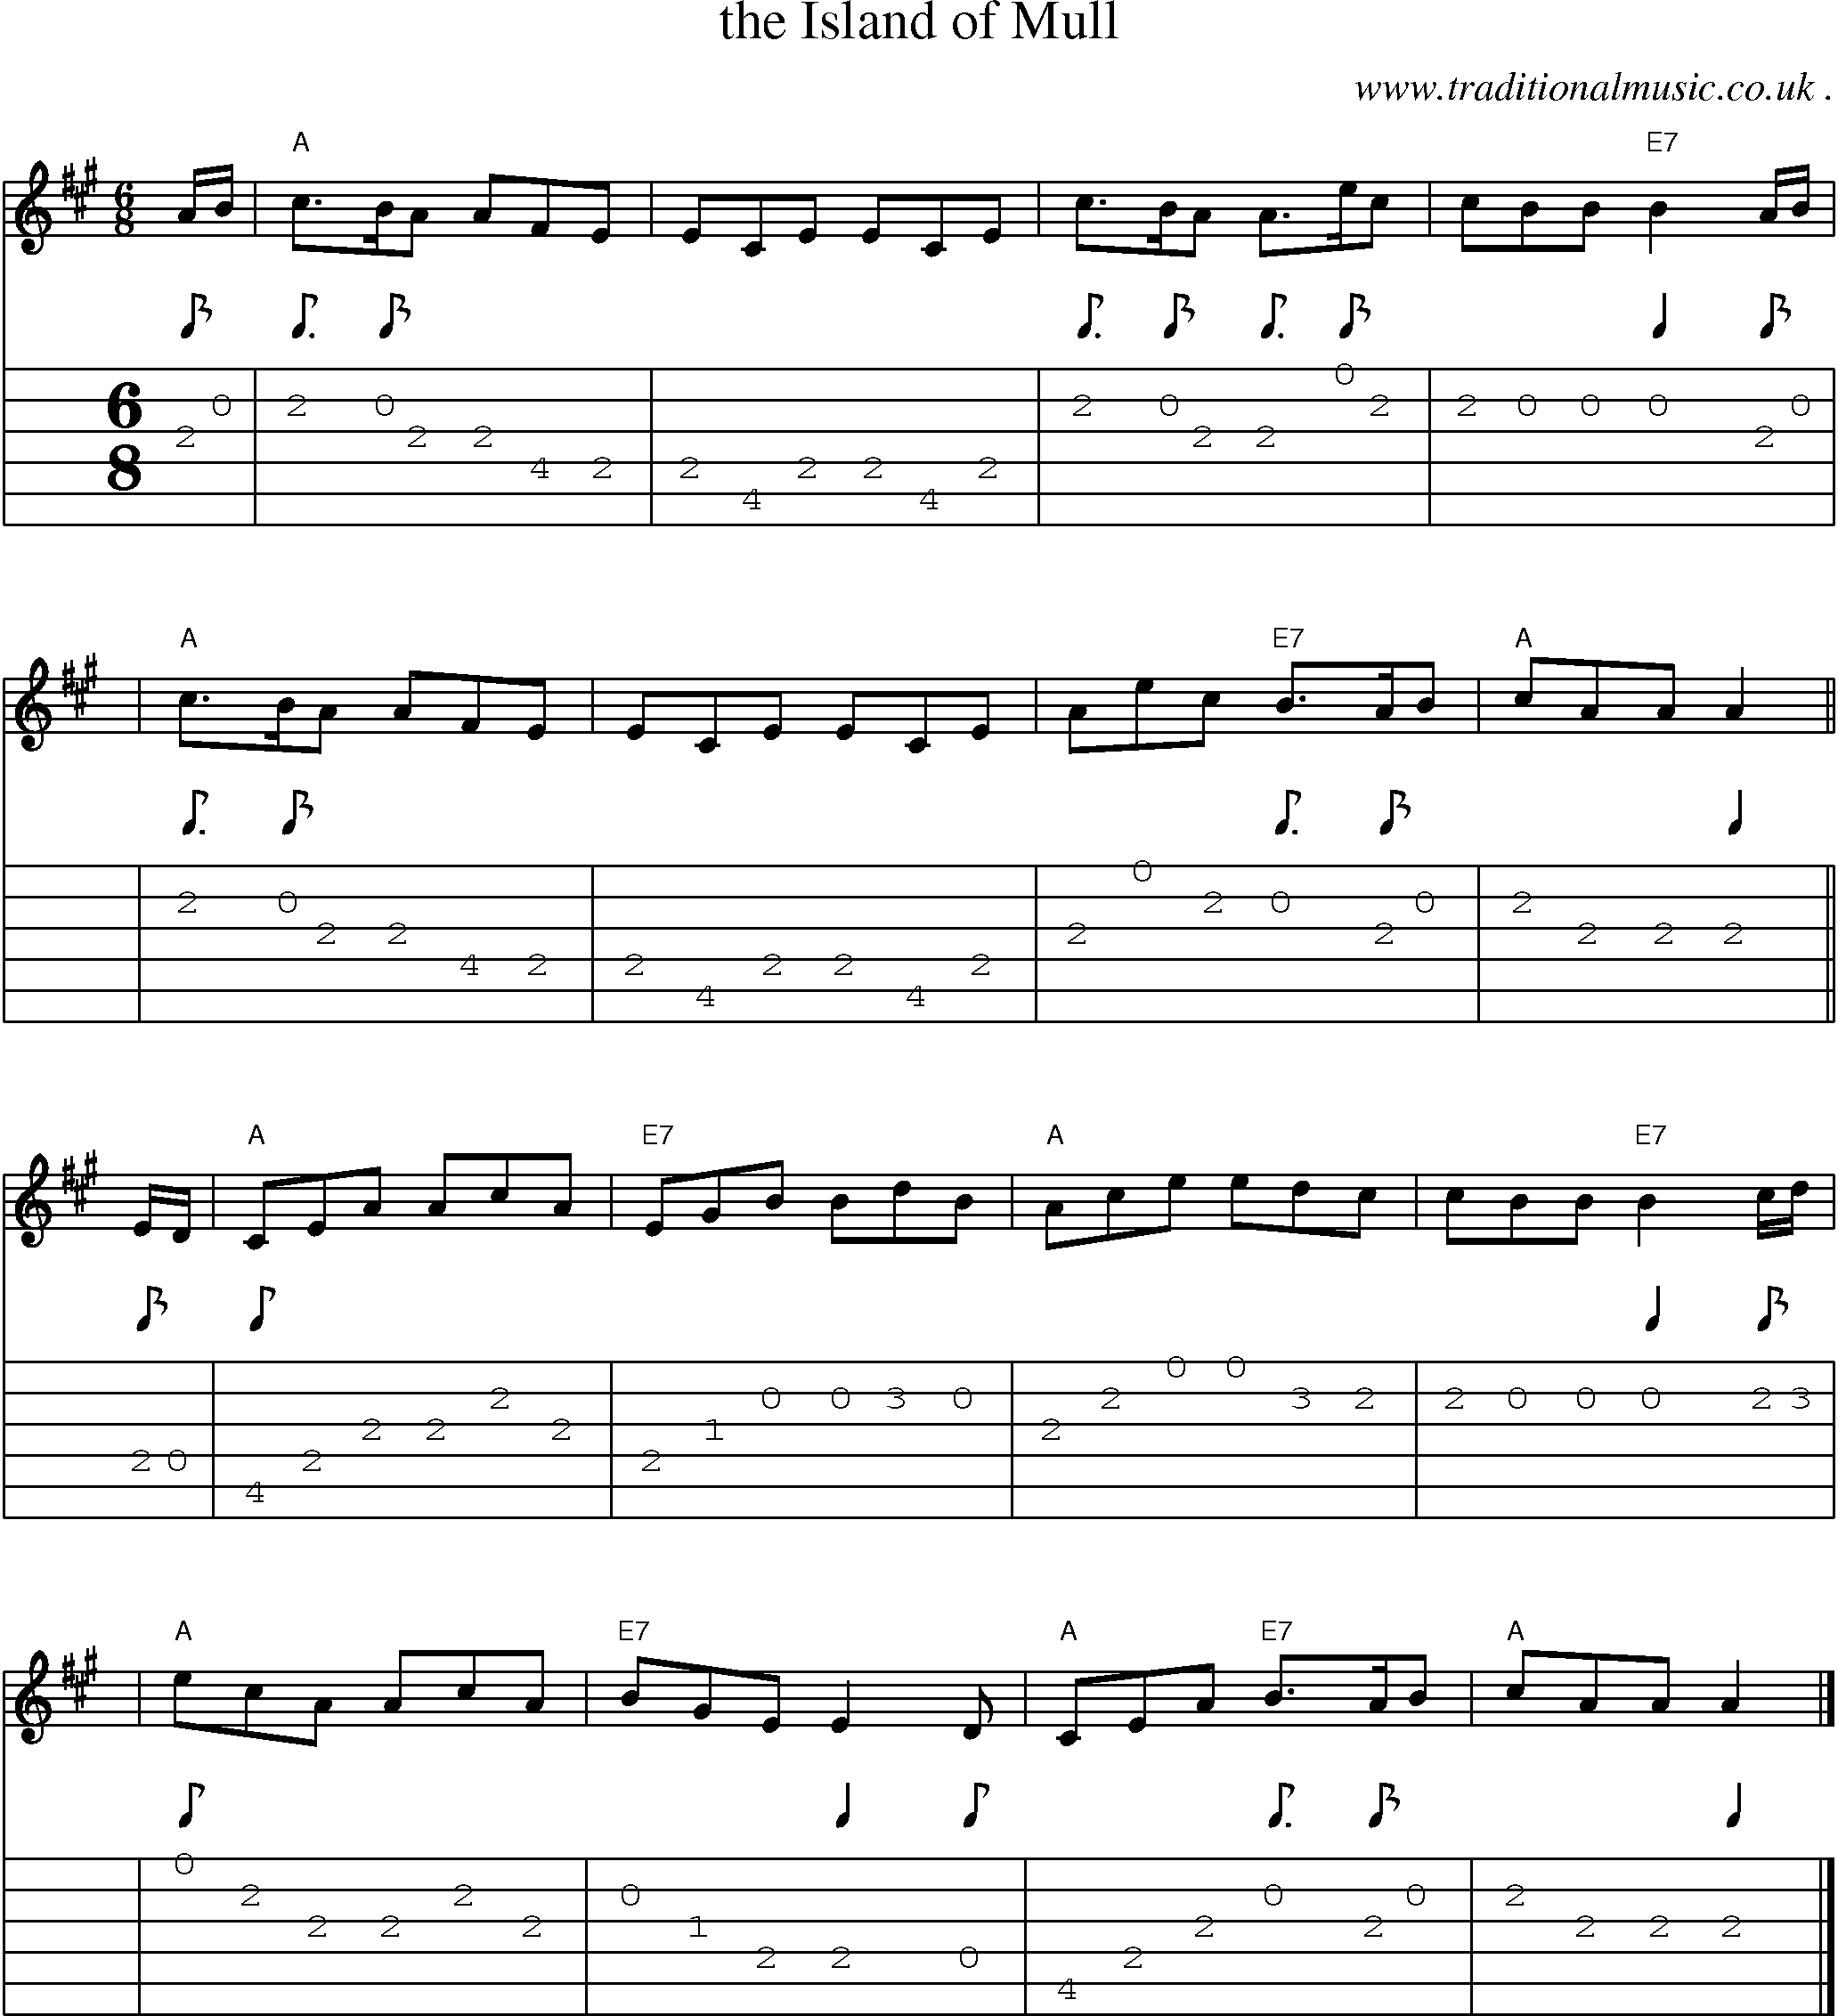 Sheet-music  score, Chords and Guitar Tabs for The Island Of Mull